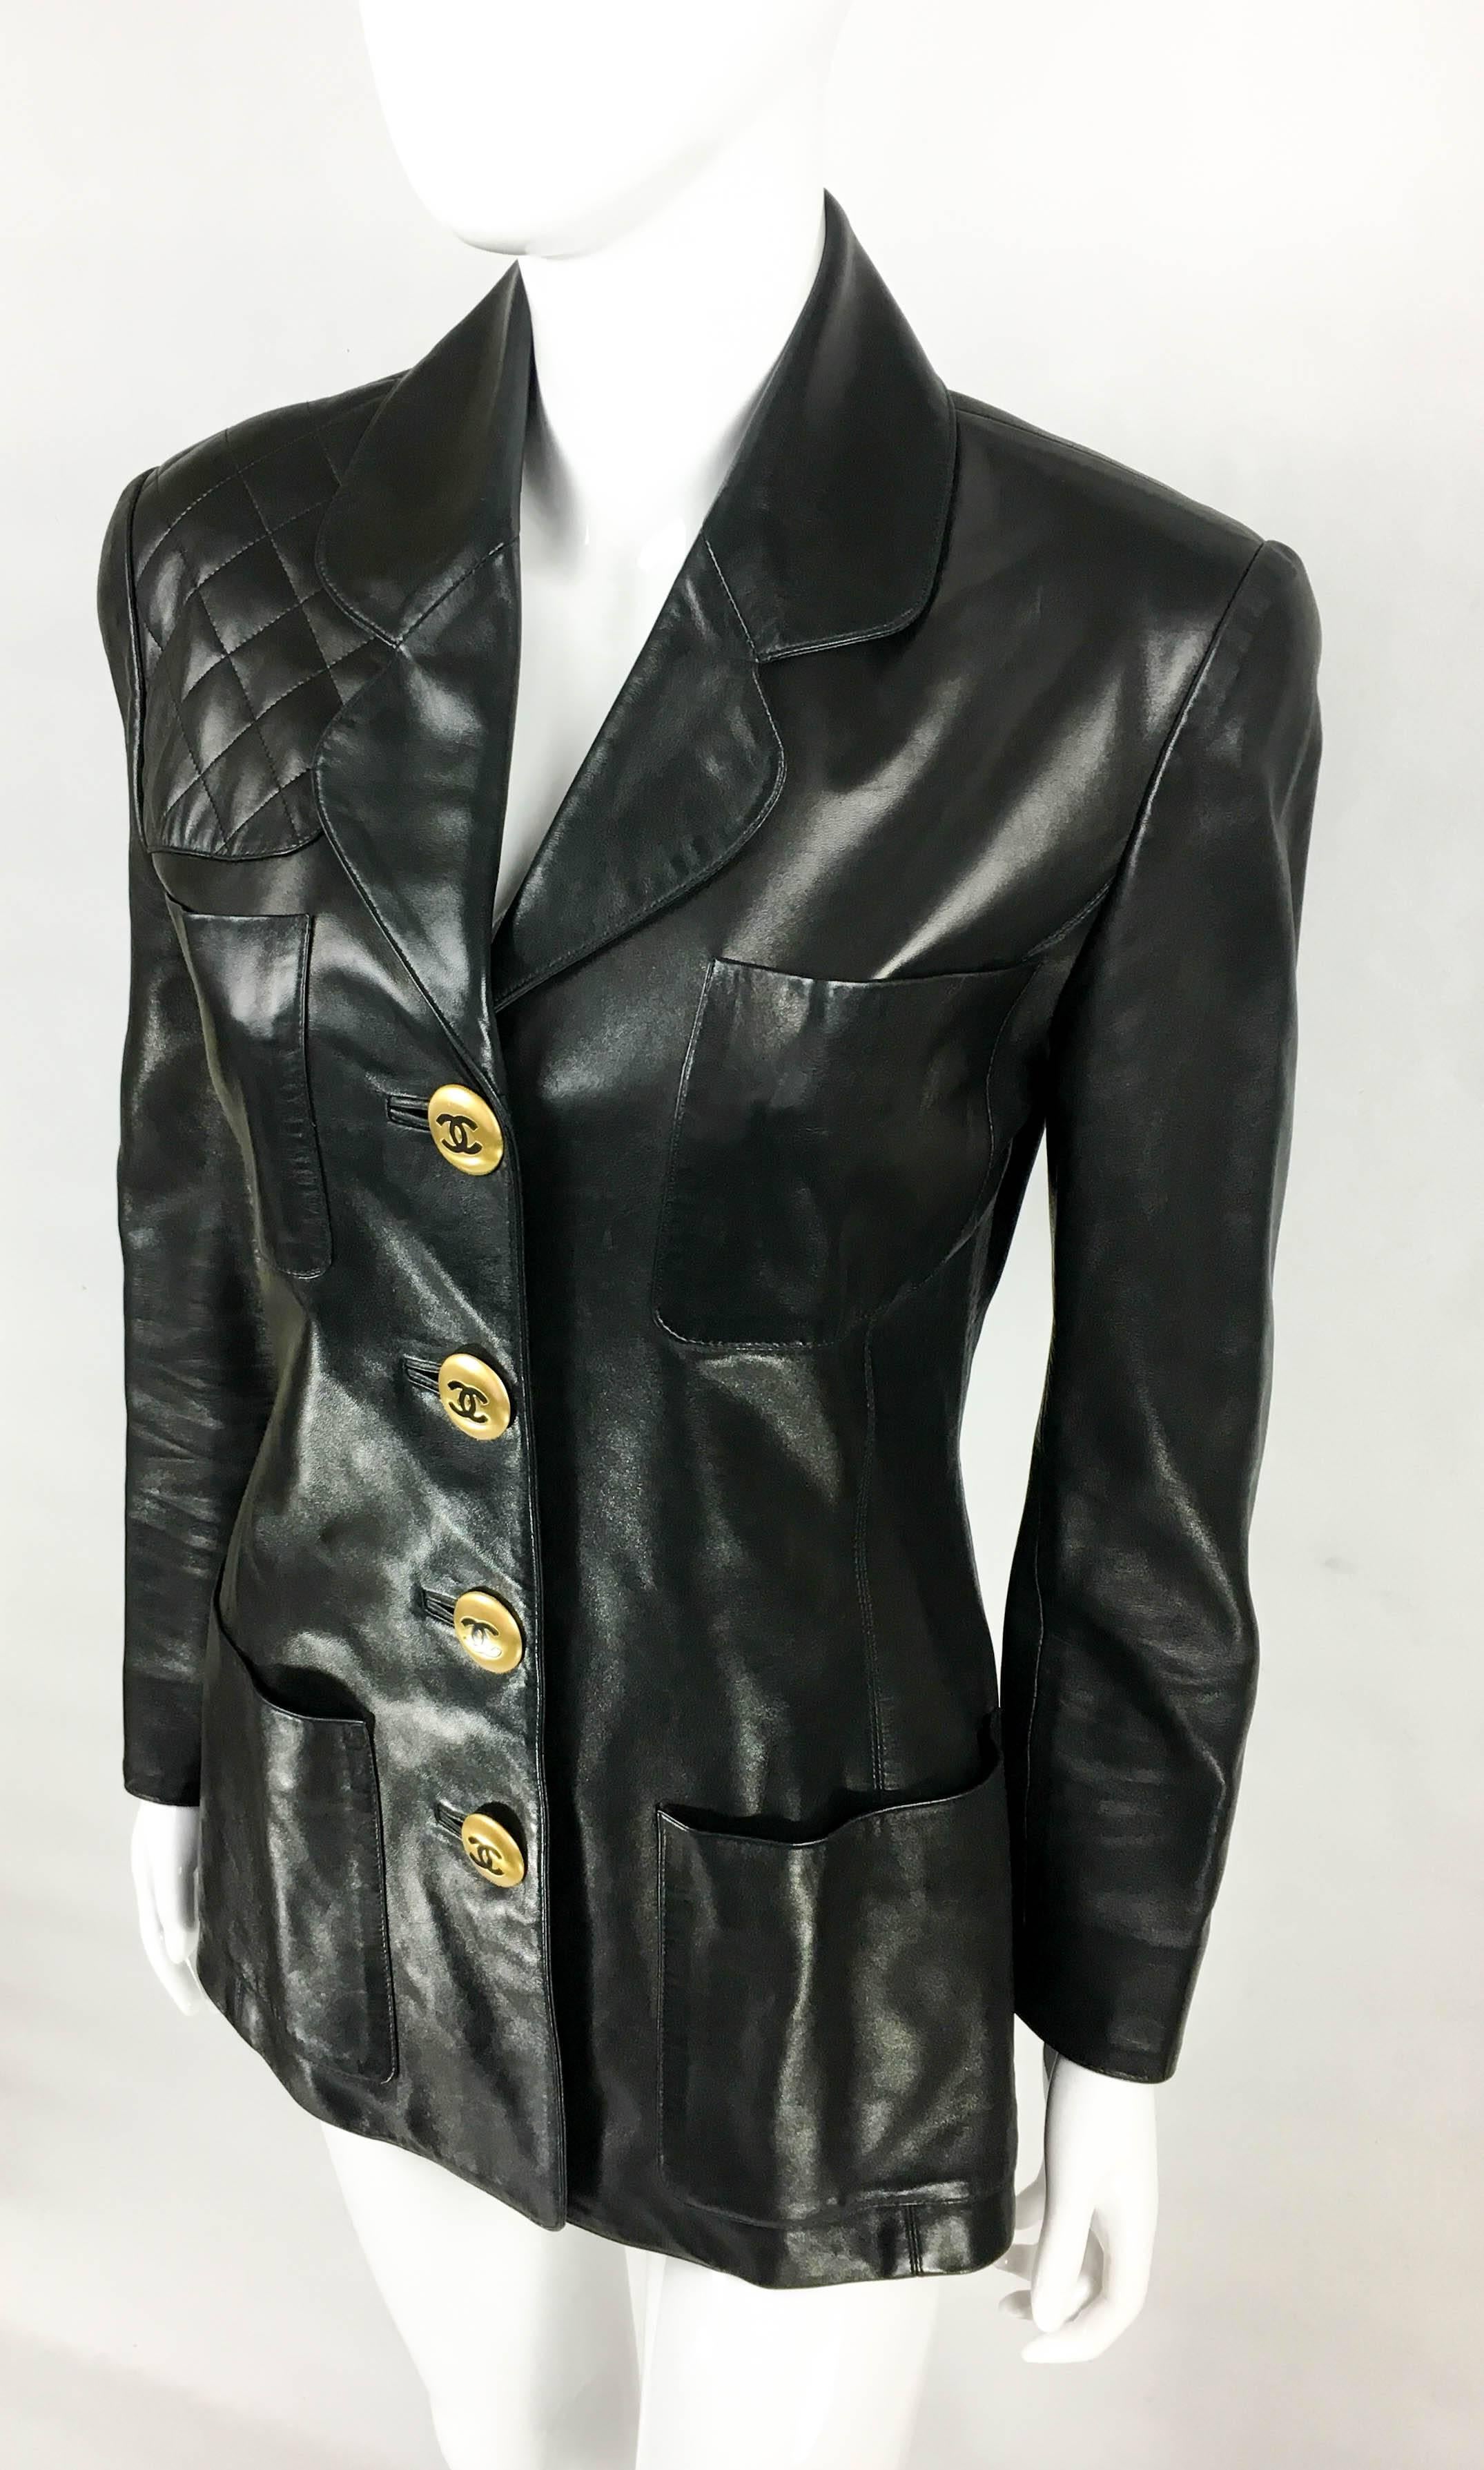 Women's 1992 Chanel Runway Look Black Leather Jacket With Quilted Shoulder